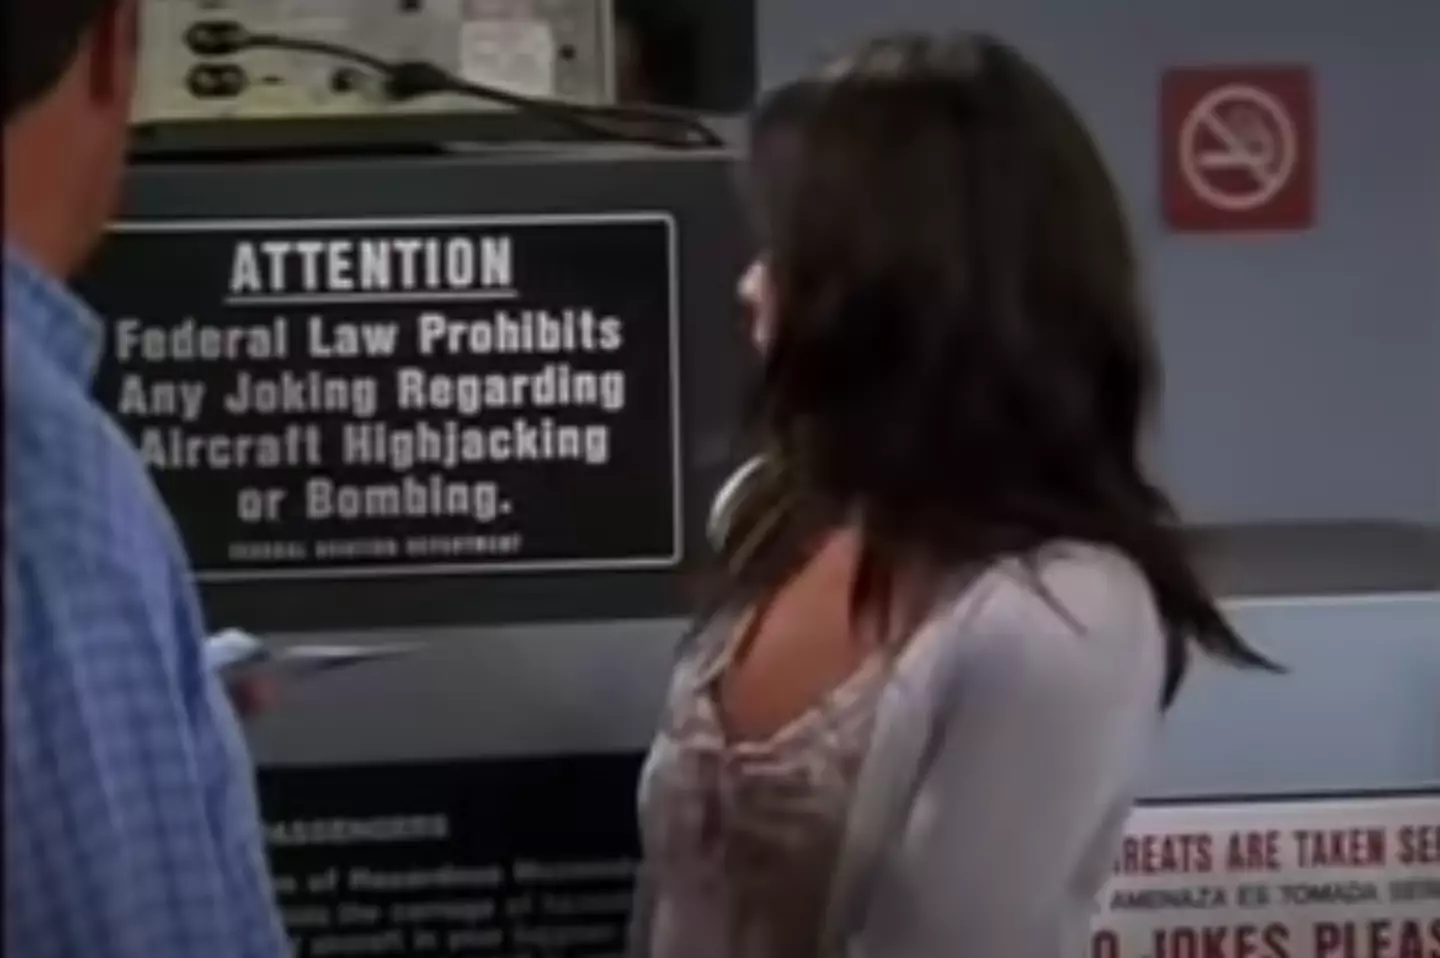 Chandler made a joke about bombs after reading the airport sign.